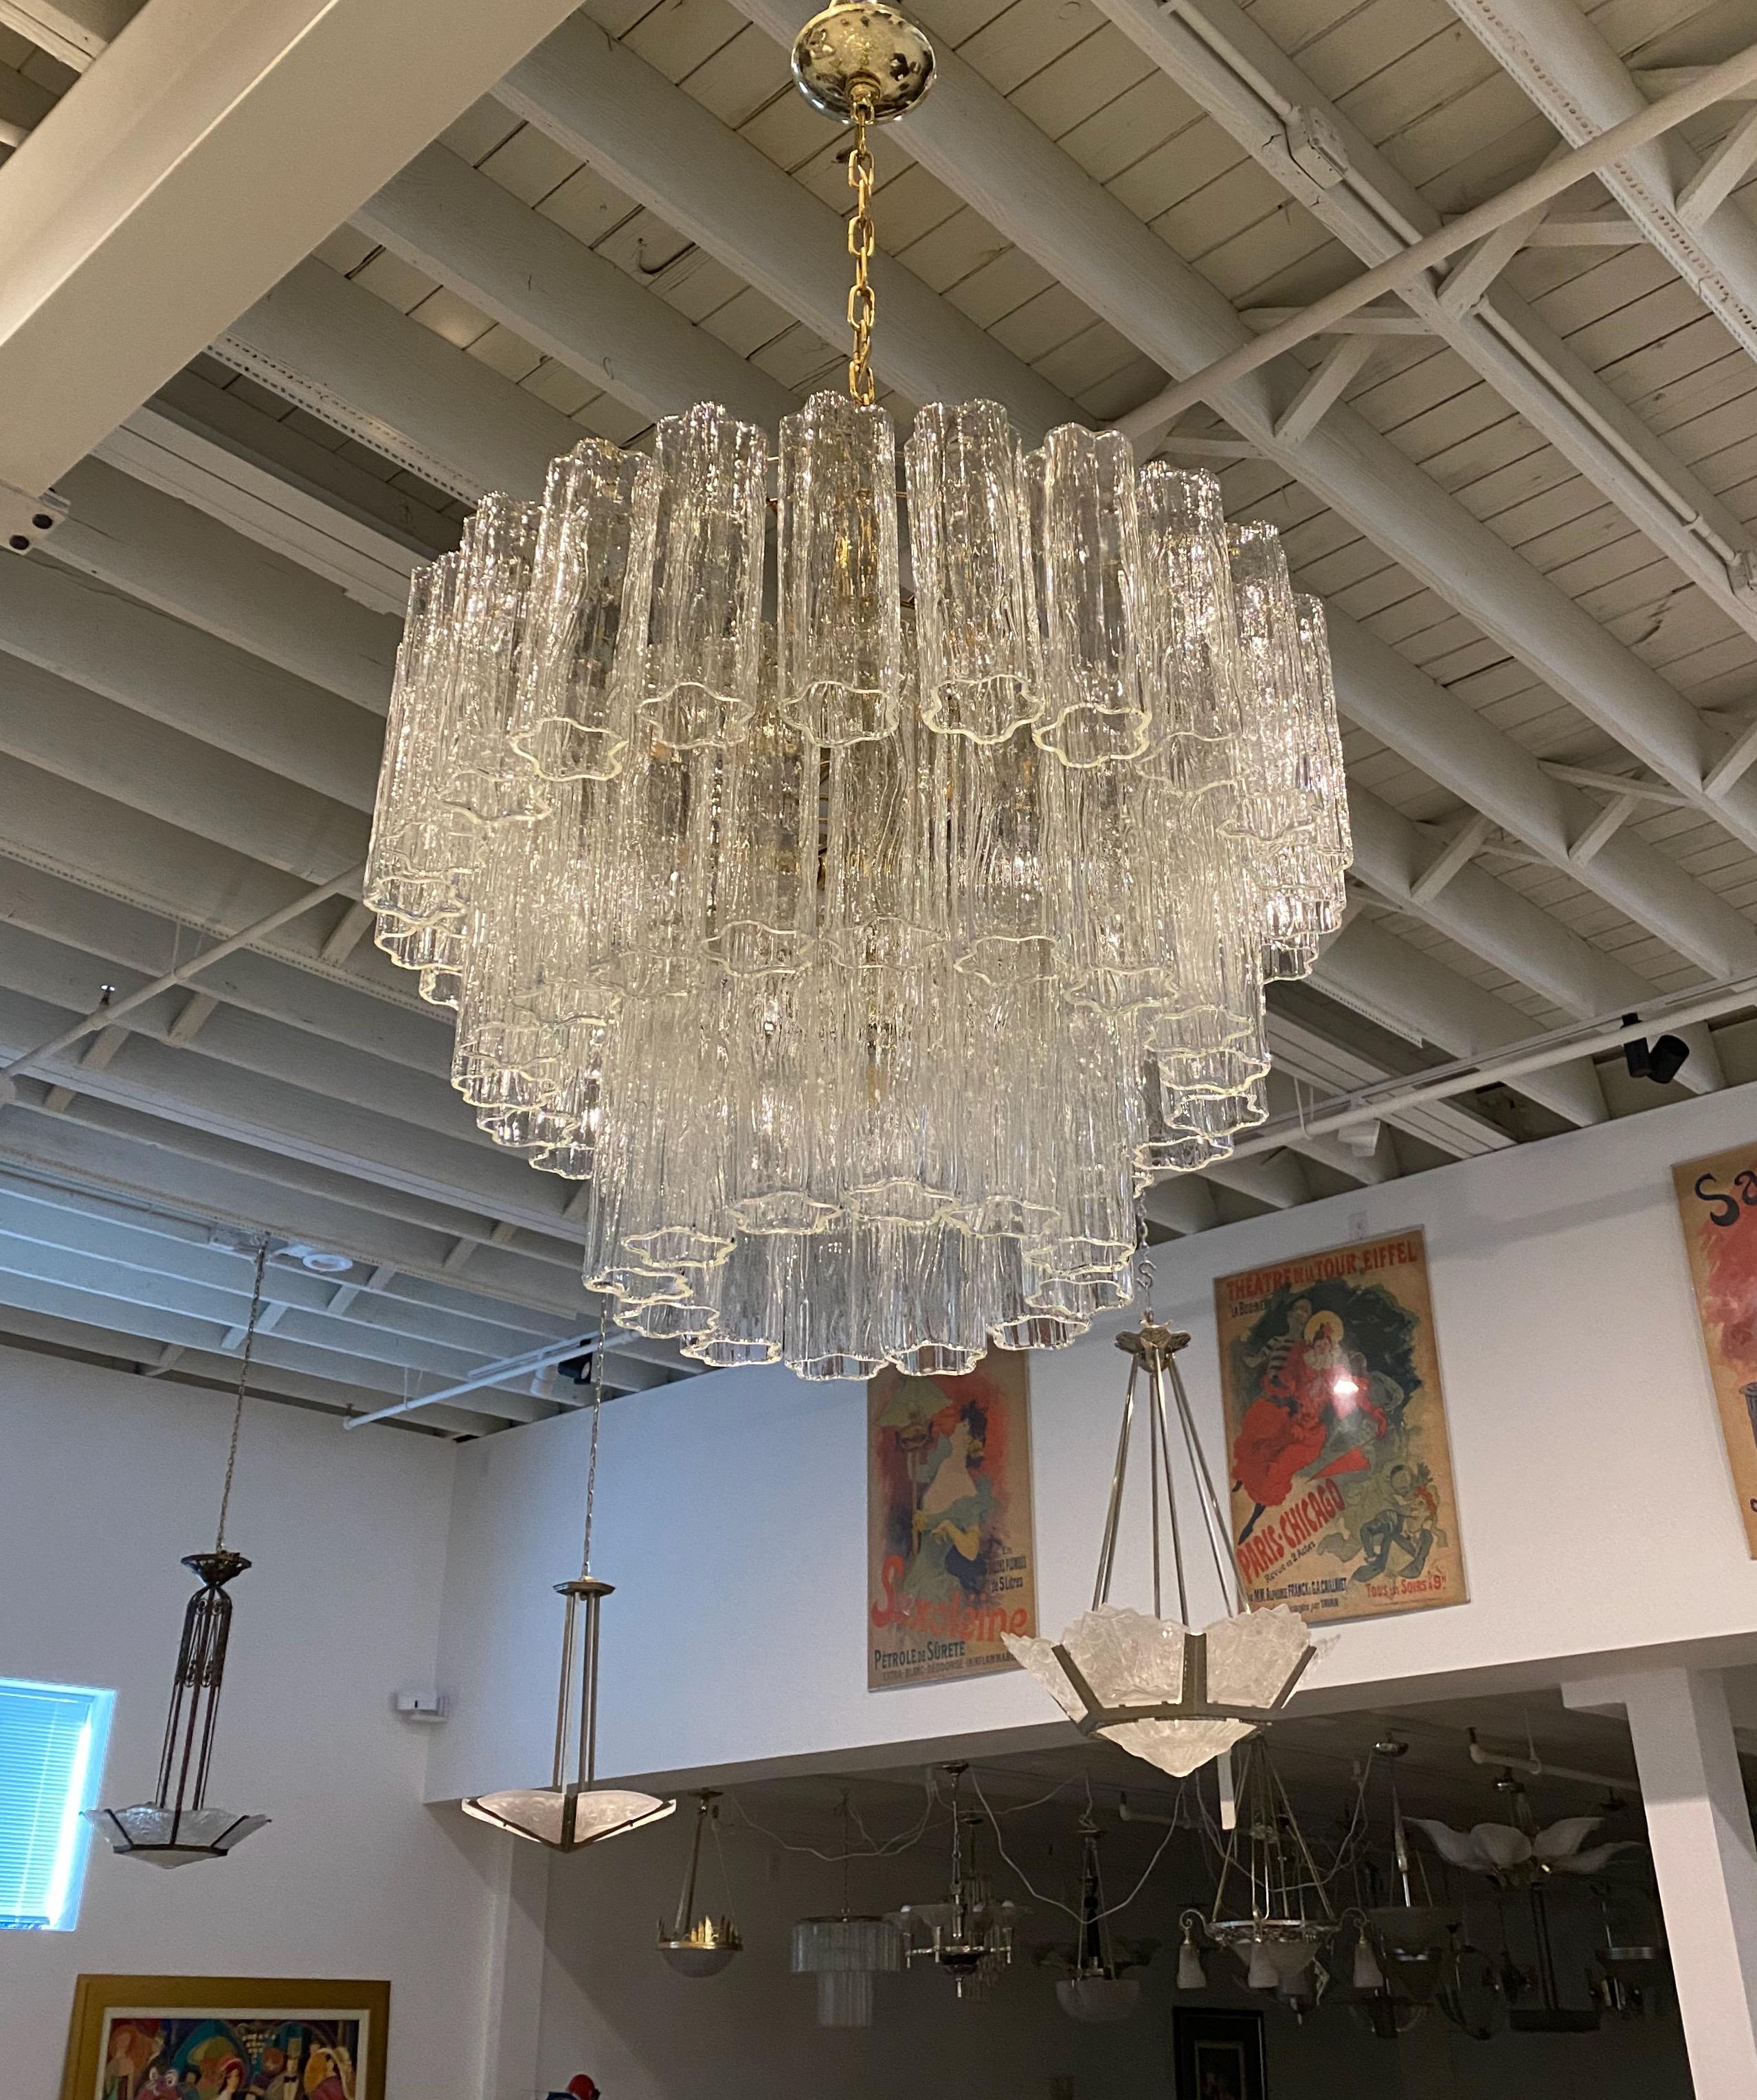 Mid-Century Modern three-tiered round chandelier. Consisting of tronchi cylindrical glass pieces. Each piece is hand blown and has a star or floral shape. The glass tronchi hangs from a brass frame as pictured. Any amount of chain can be added for